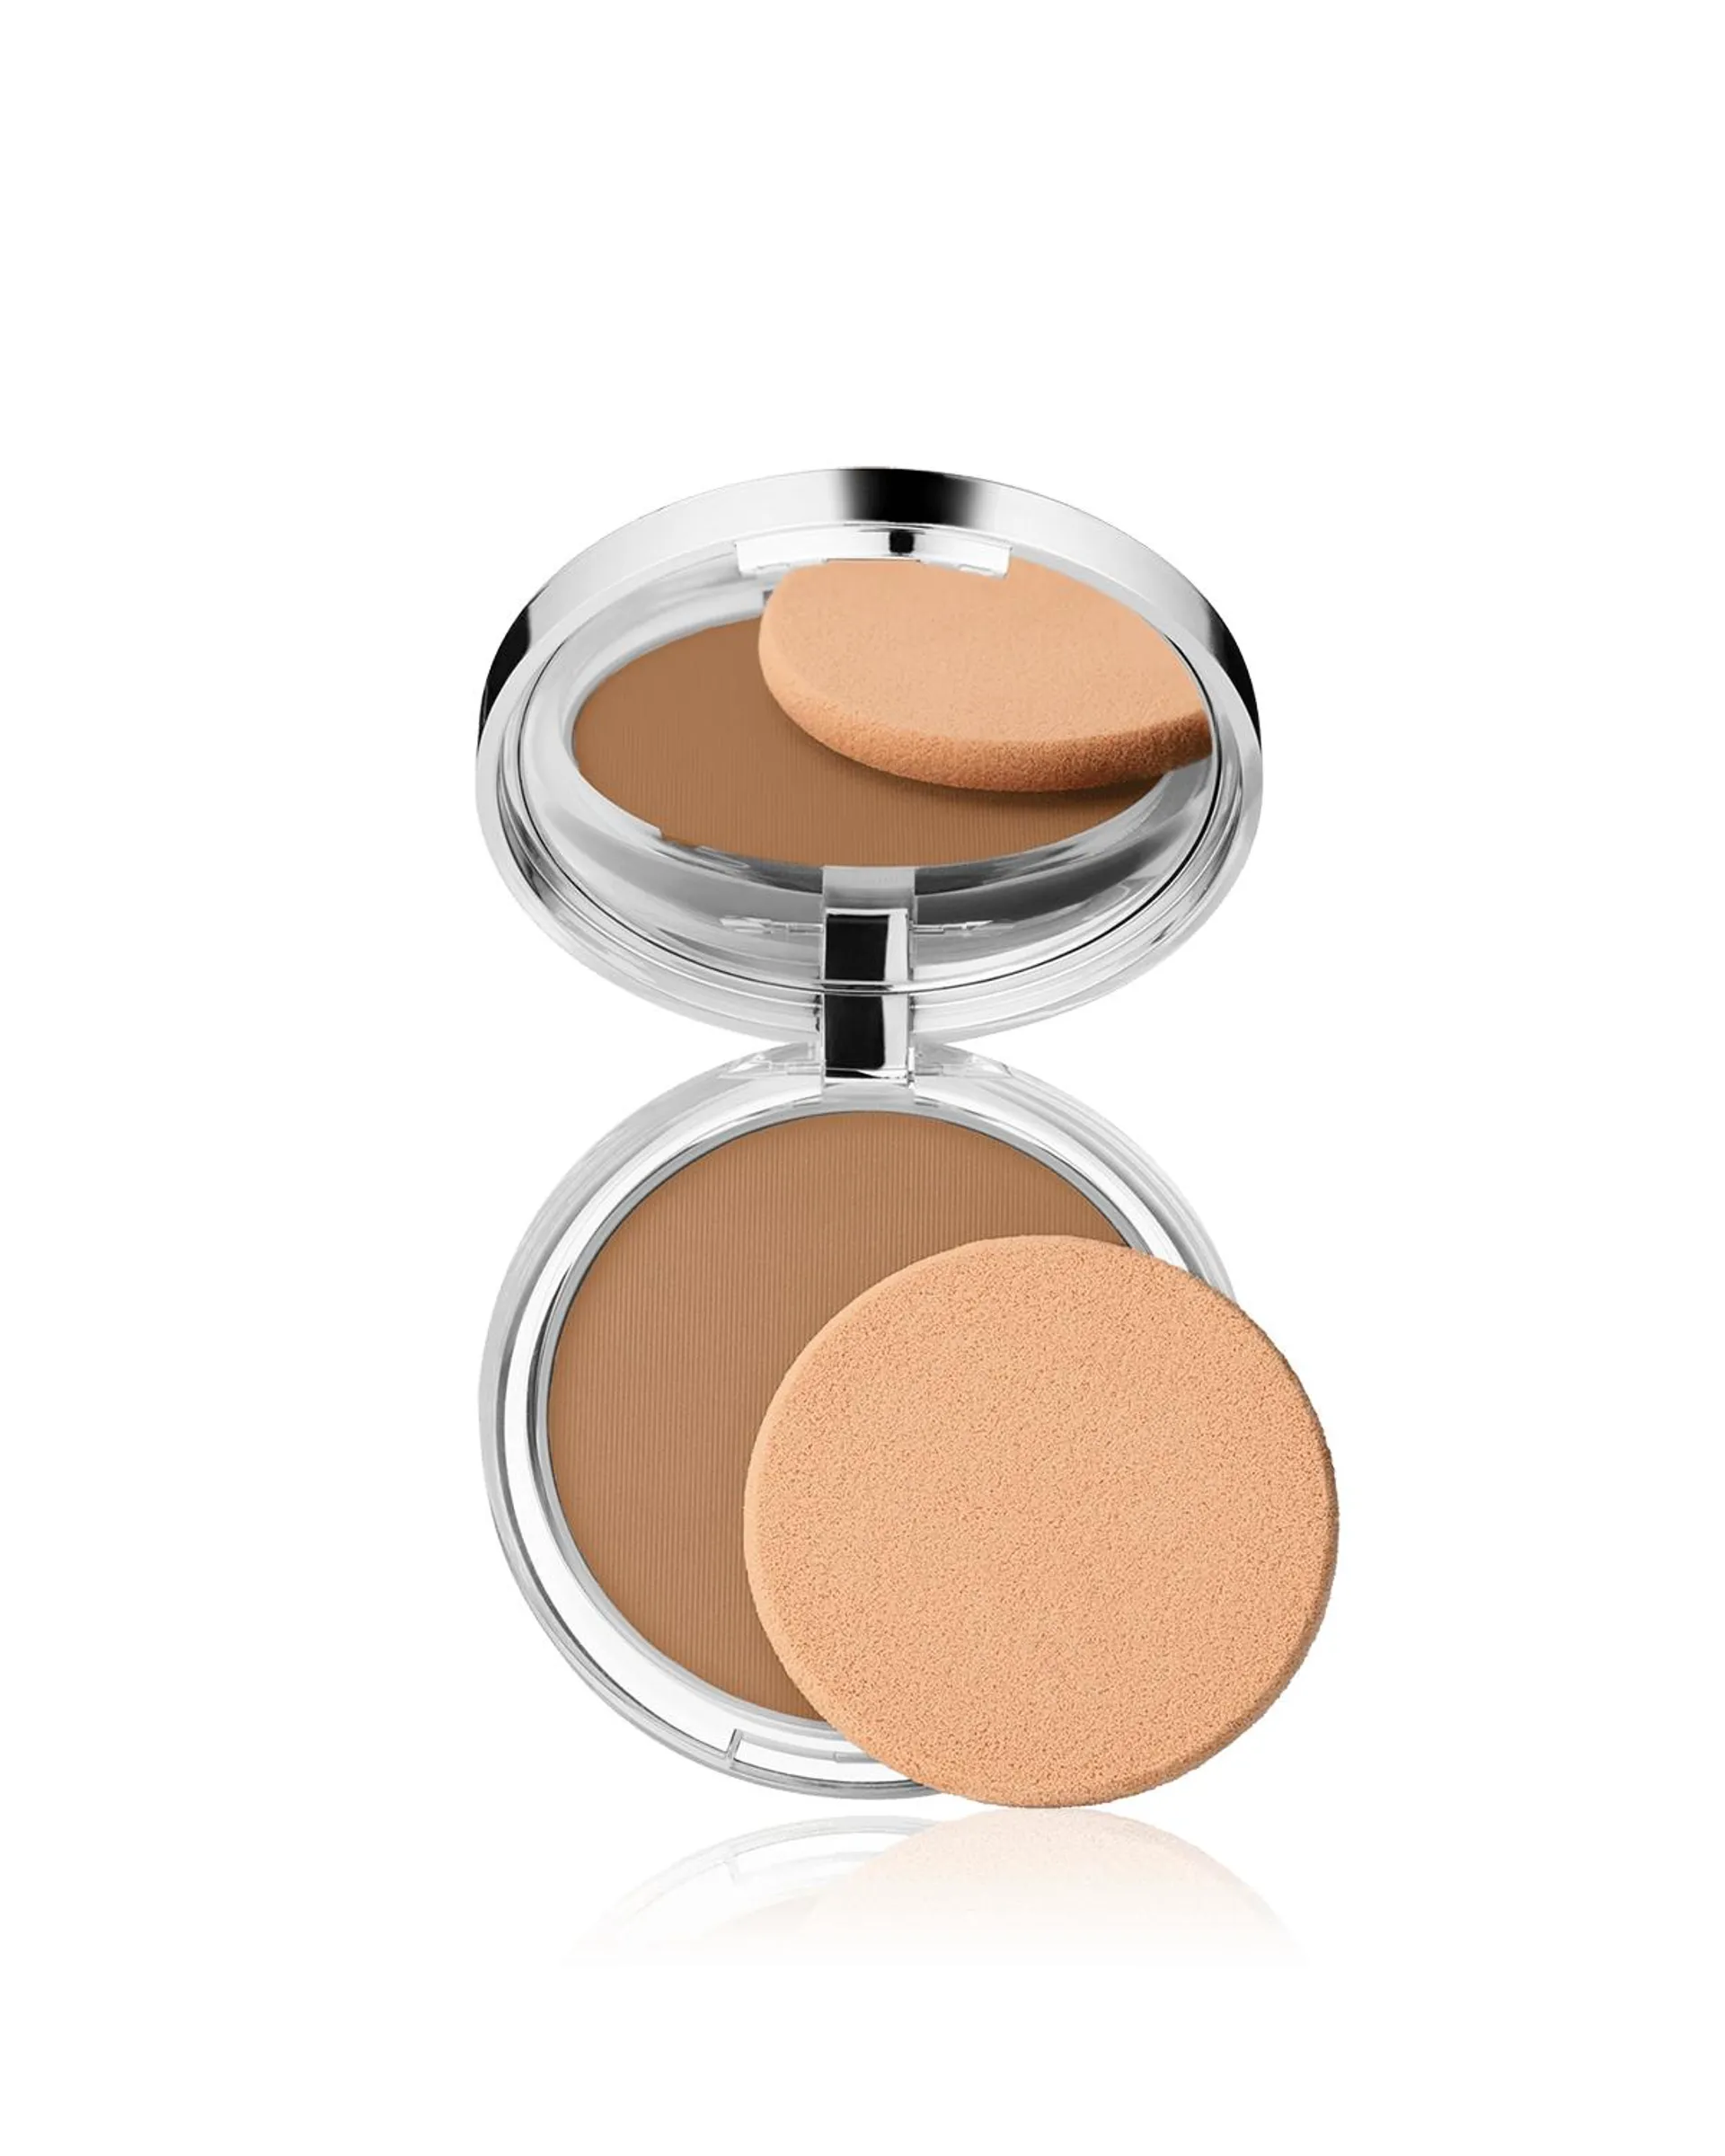 Polvo Compacto Stay-Matte Sheer